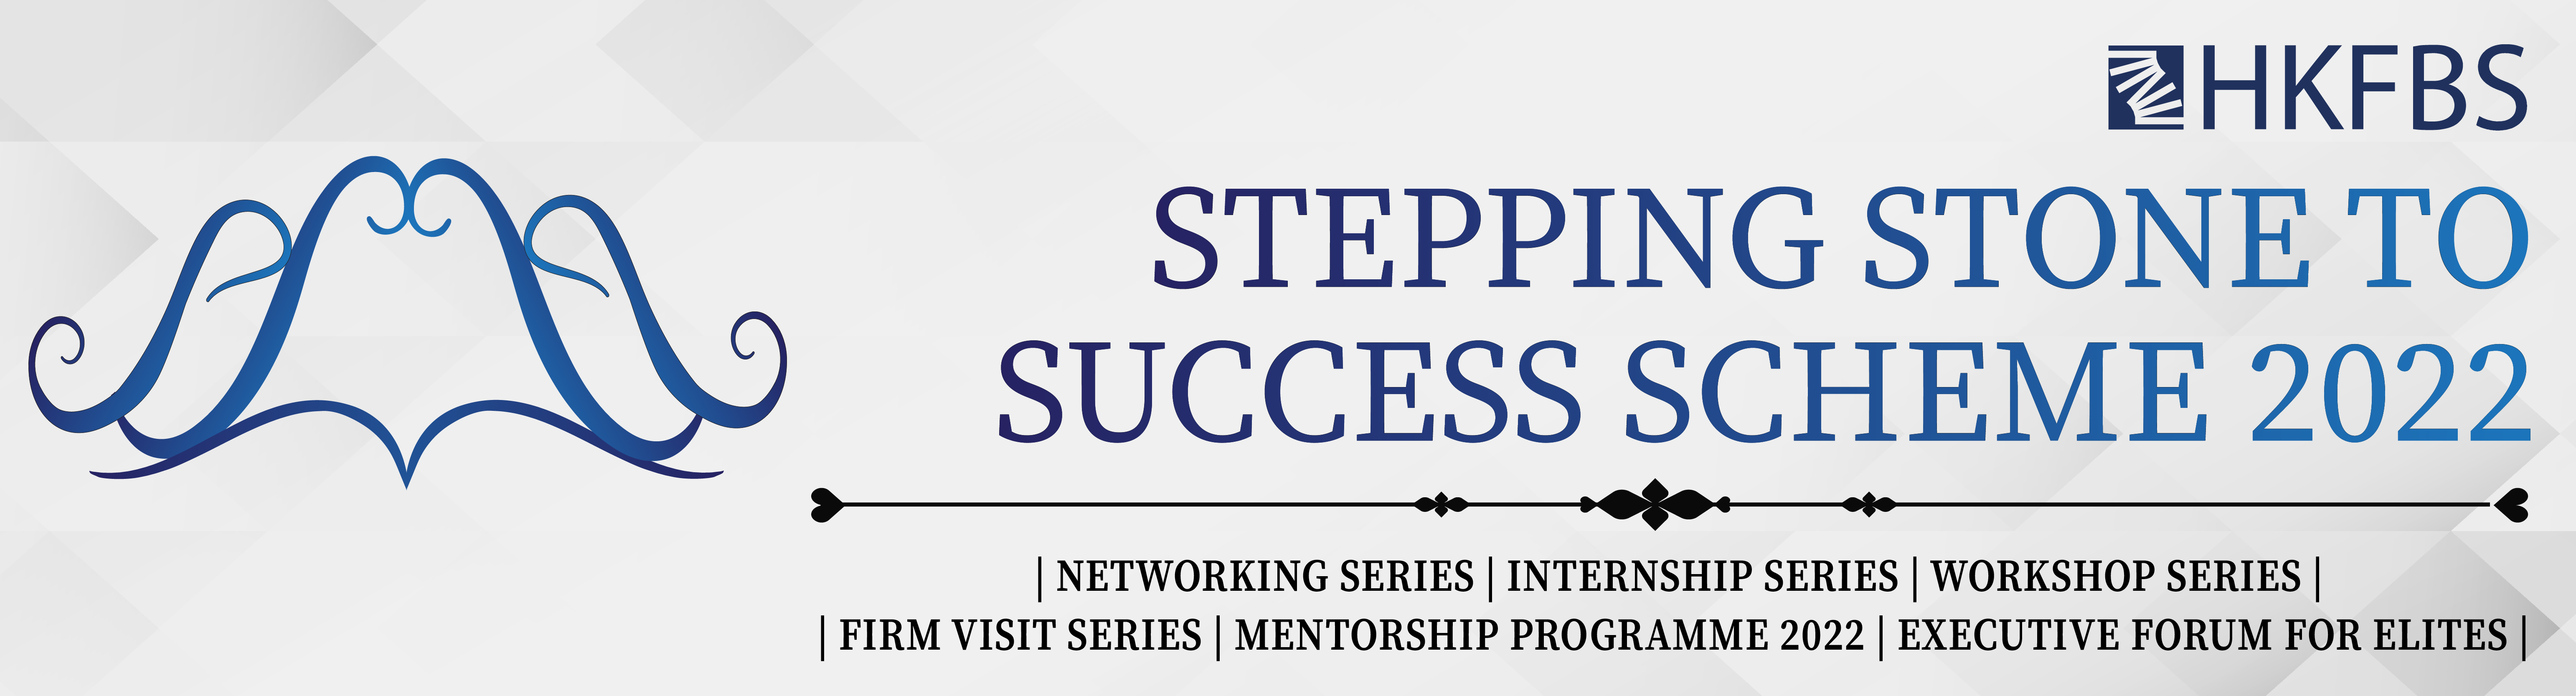 Networking Series